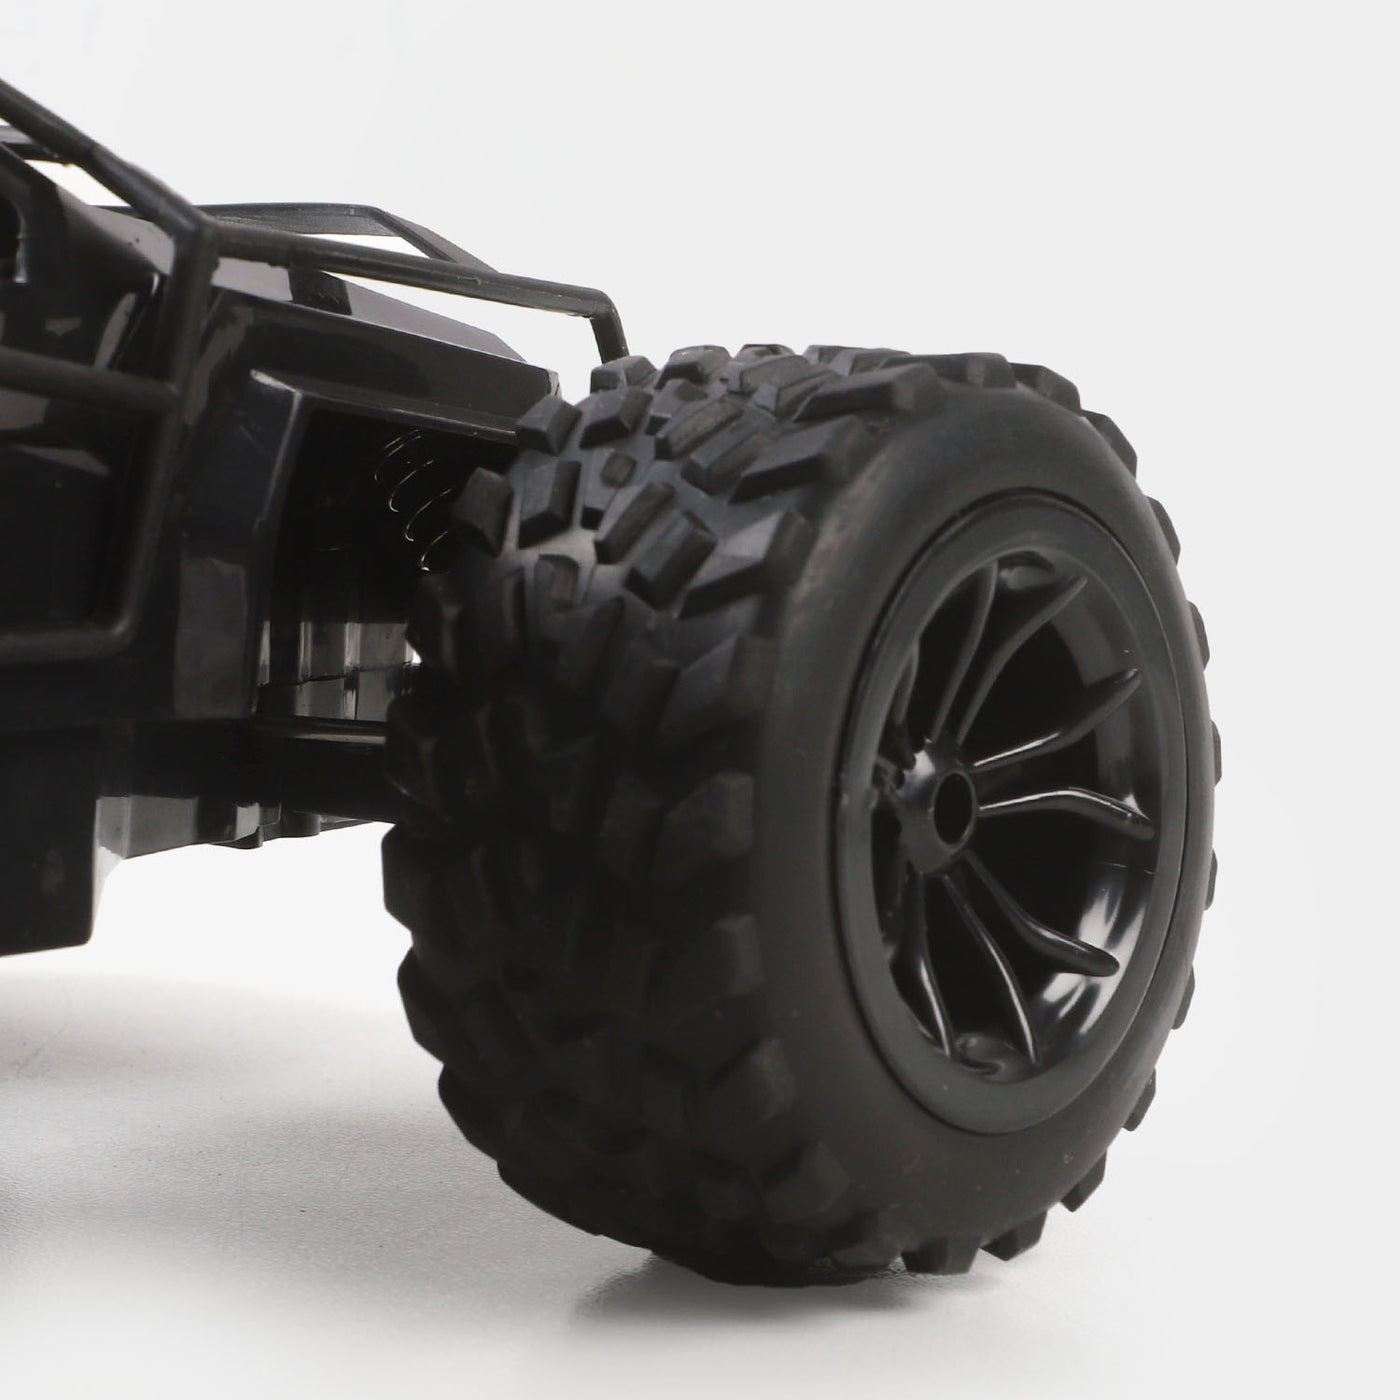 Sand Monster Truck Remote Control Toy For Kids